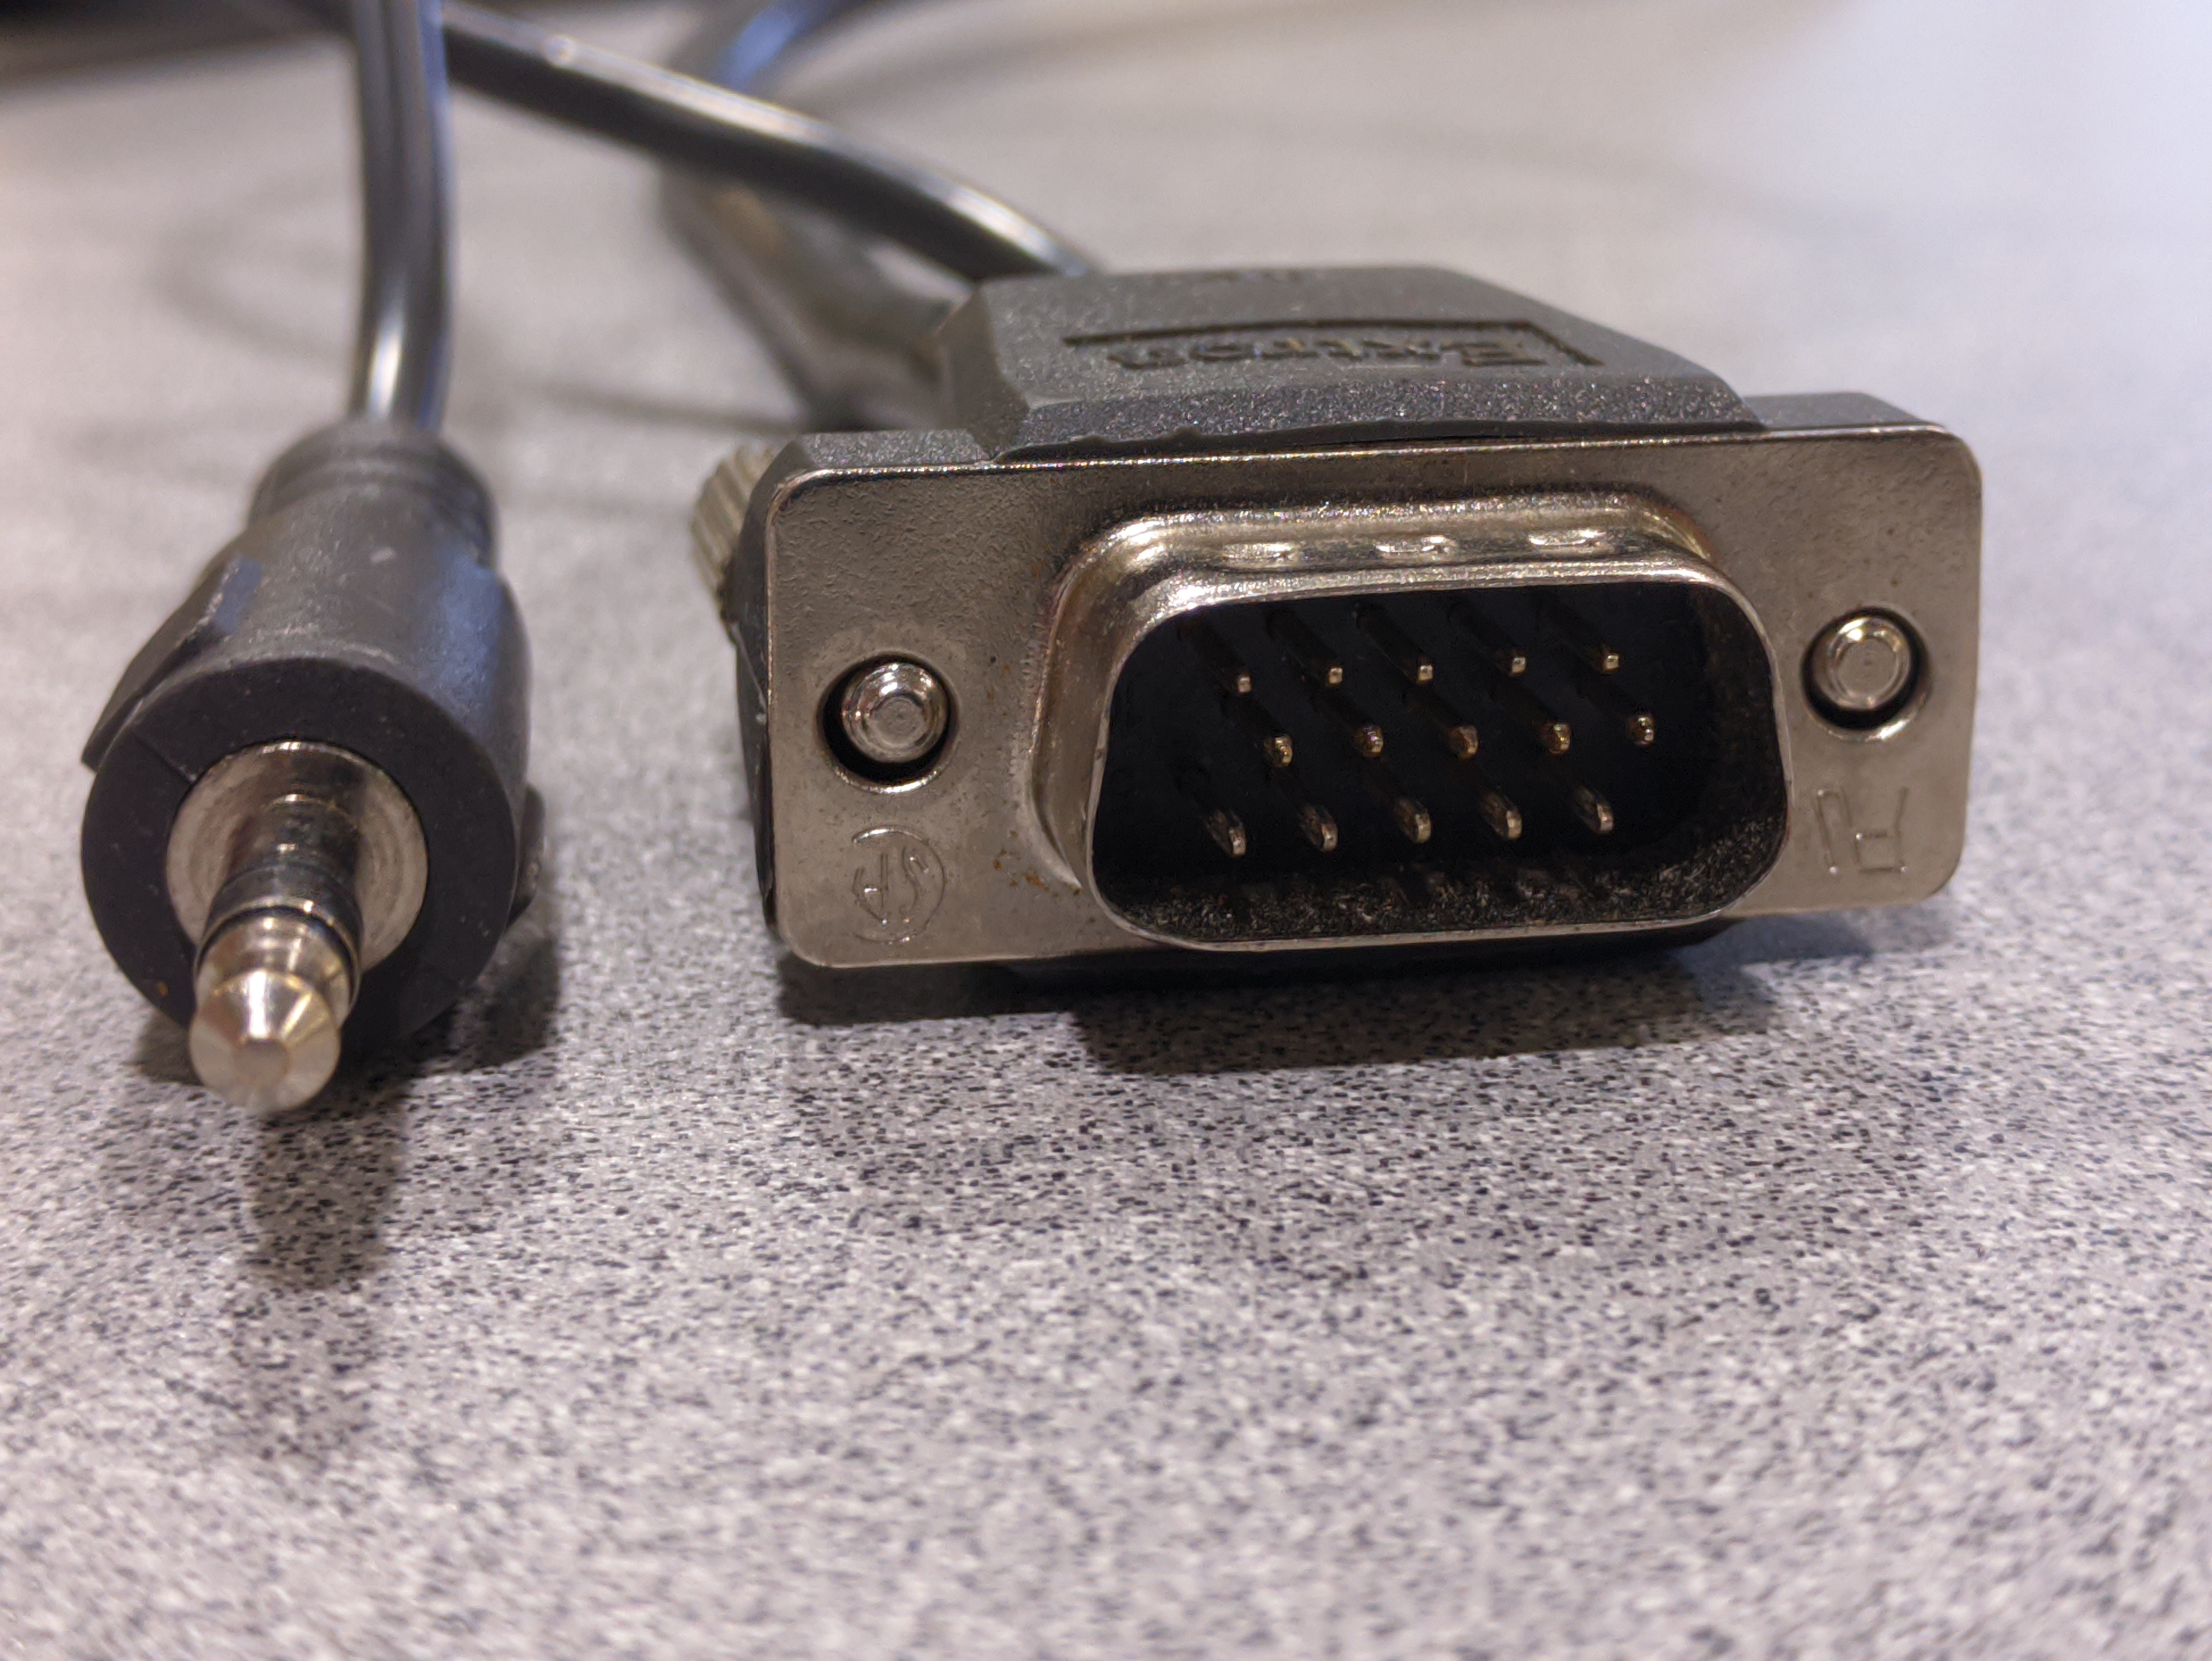 VGA cable connector and a 3.5mm Headphone connector